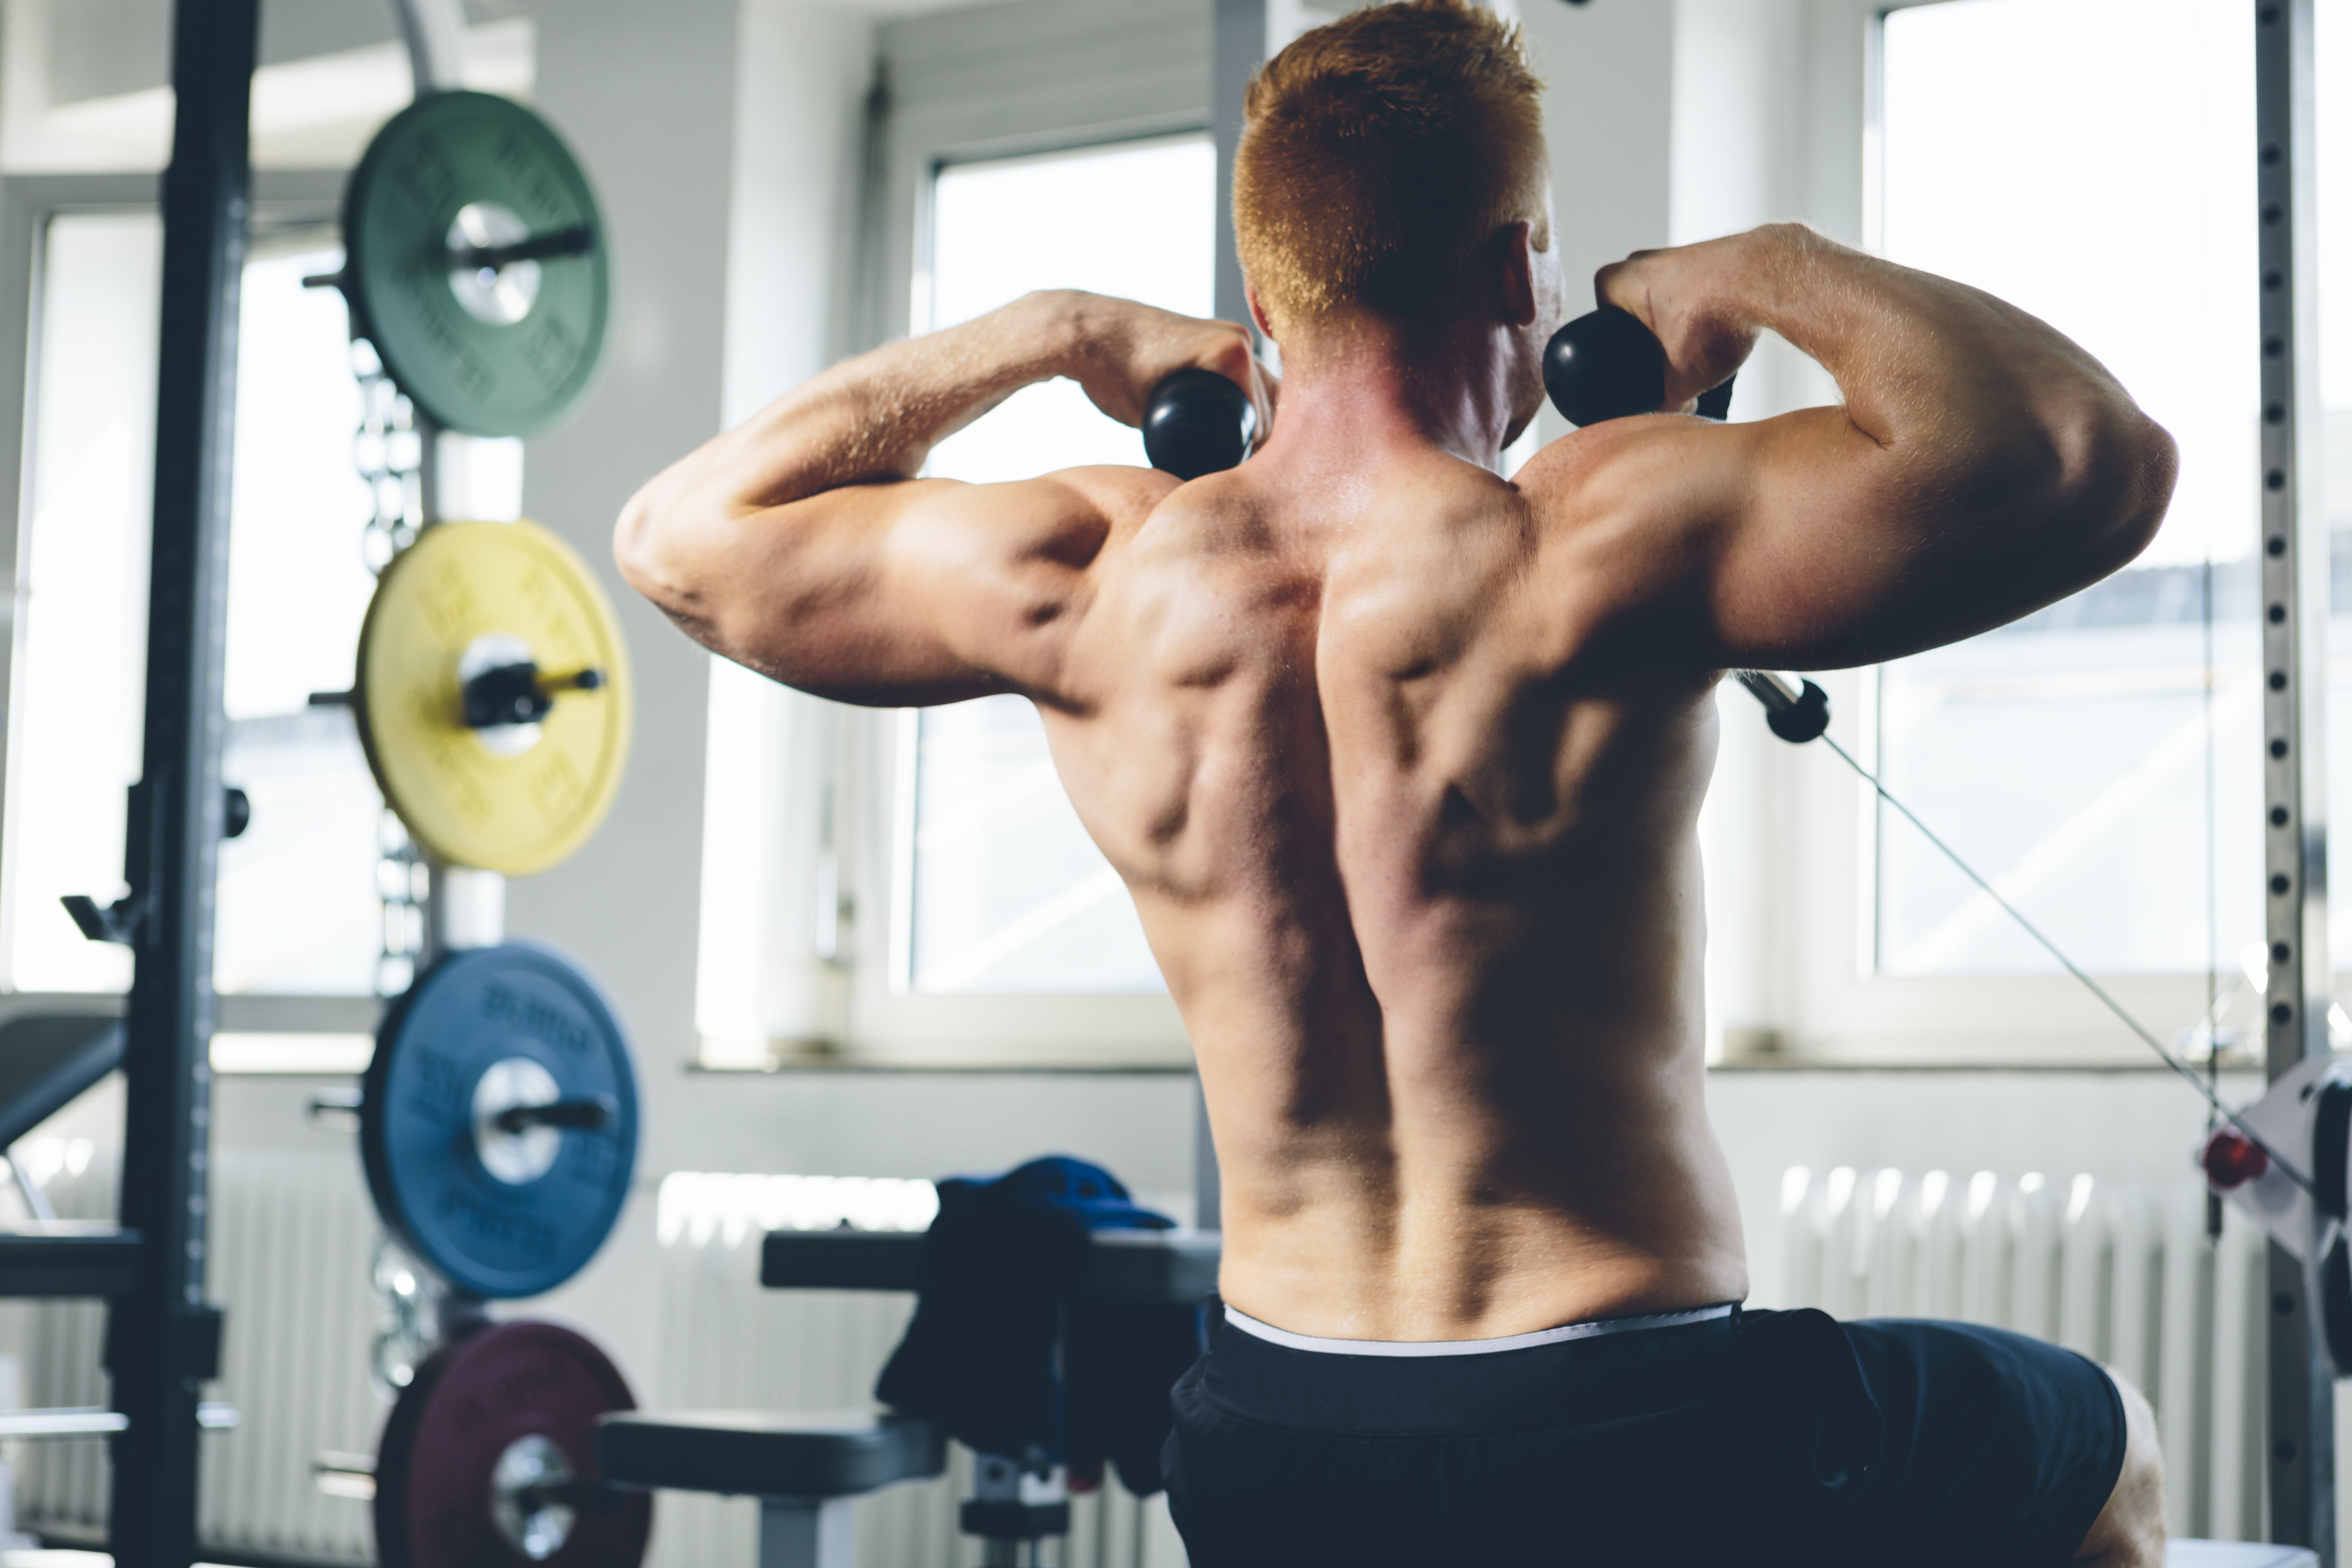 5 Shoulder Health Exercises to Build Stability and Strength